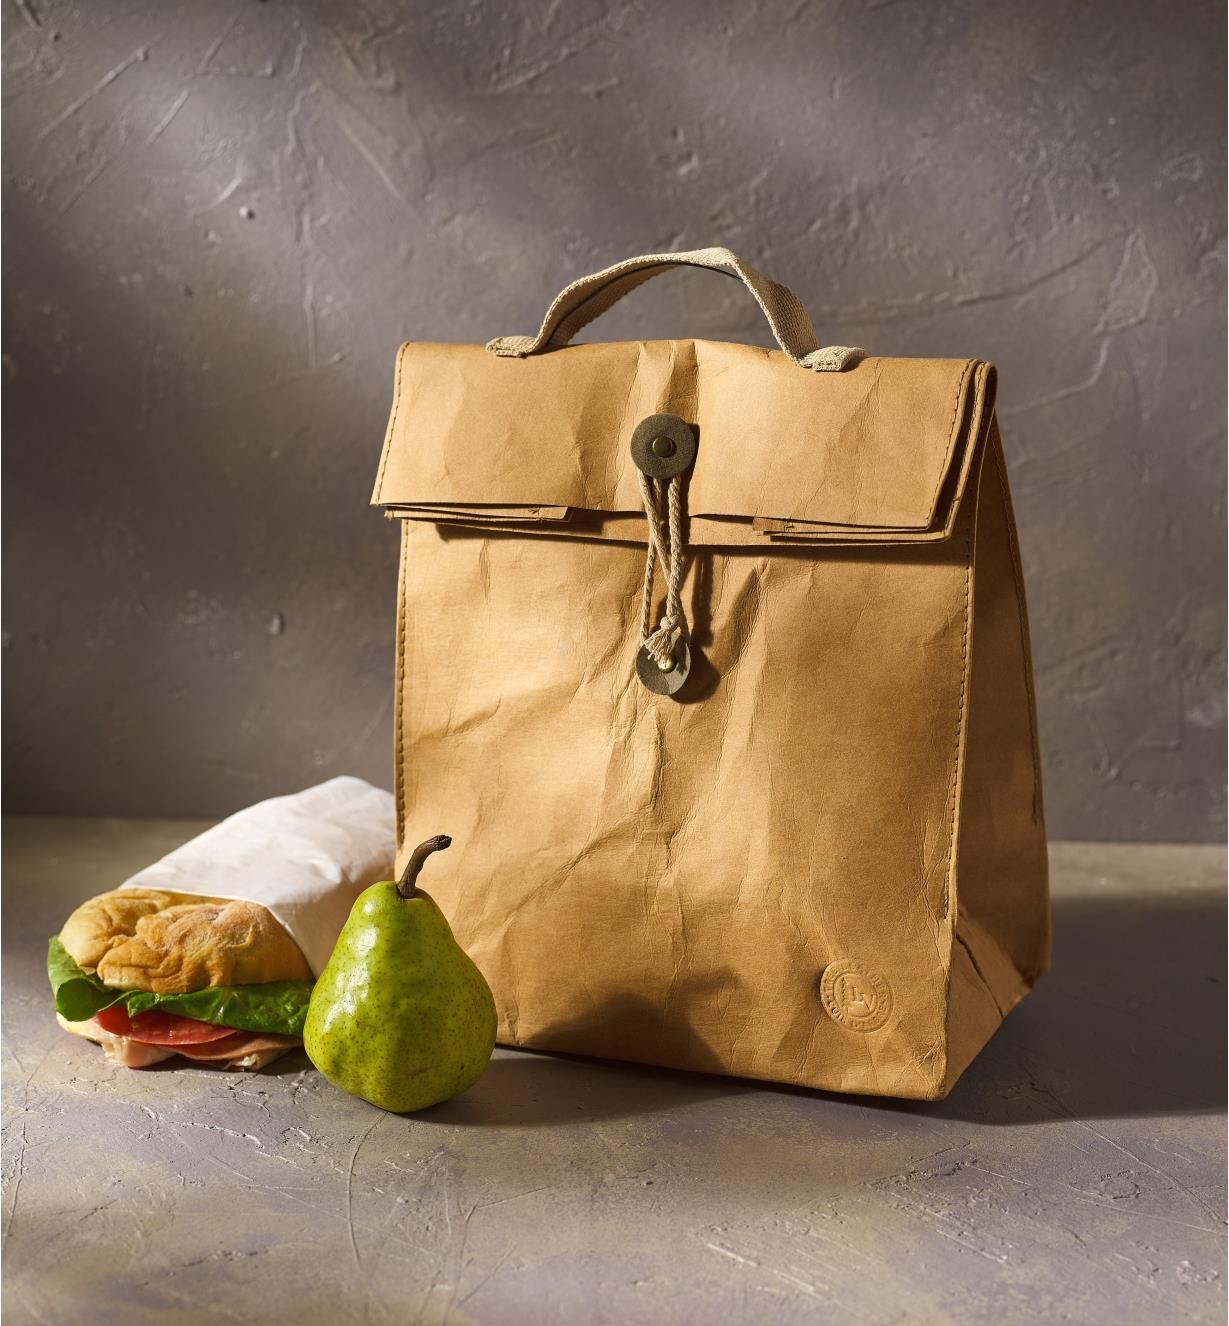 A sandwich and a pear outside a closed tree leather lunch bag